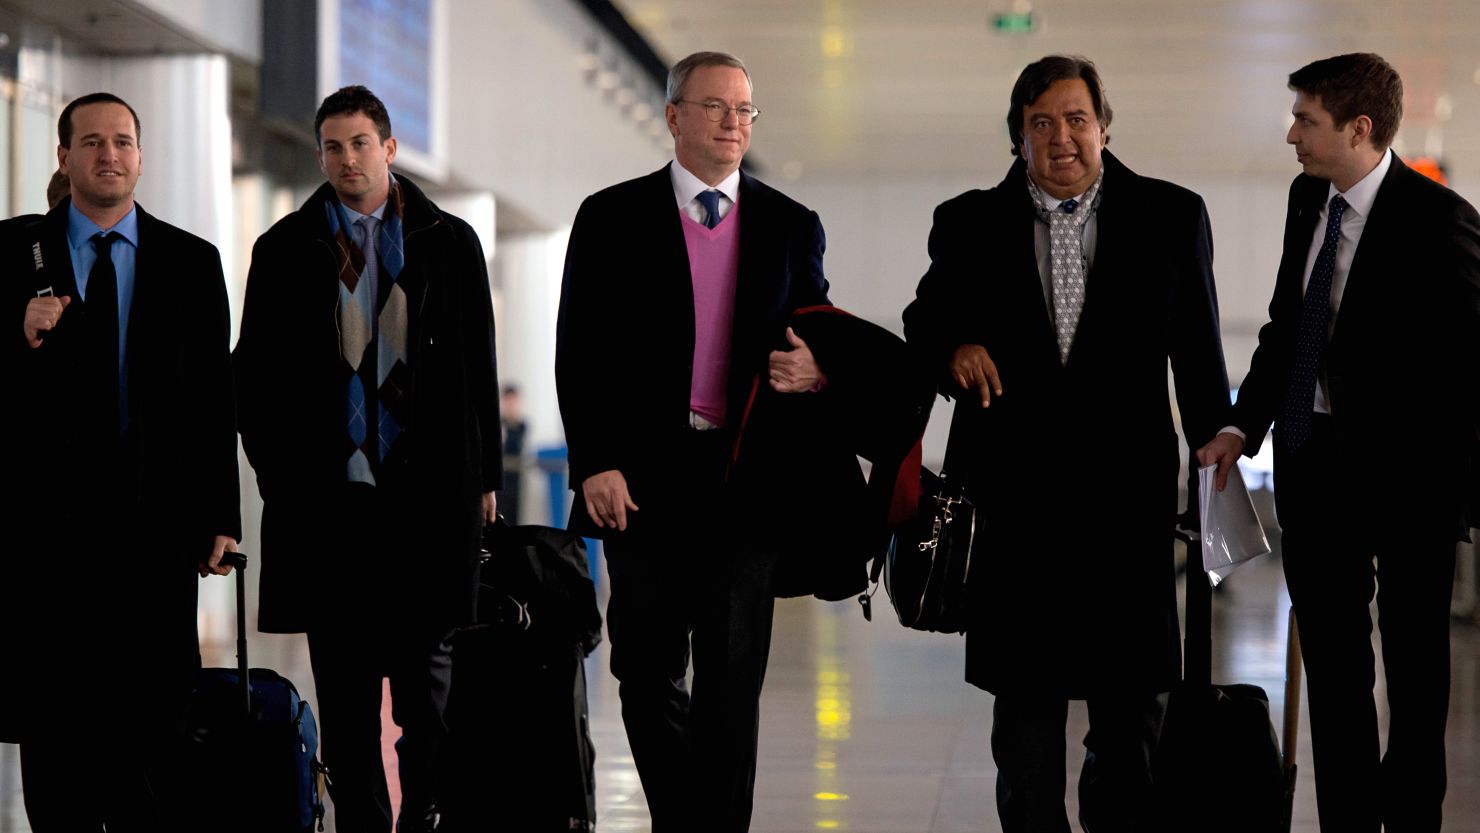 Google chairman Eric Schmidt, center, arrives at Beijing airport from North Korea on January 10, 2013.